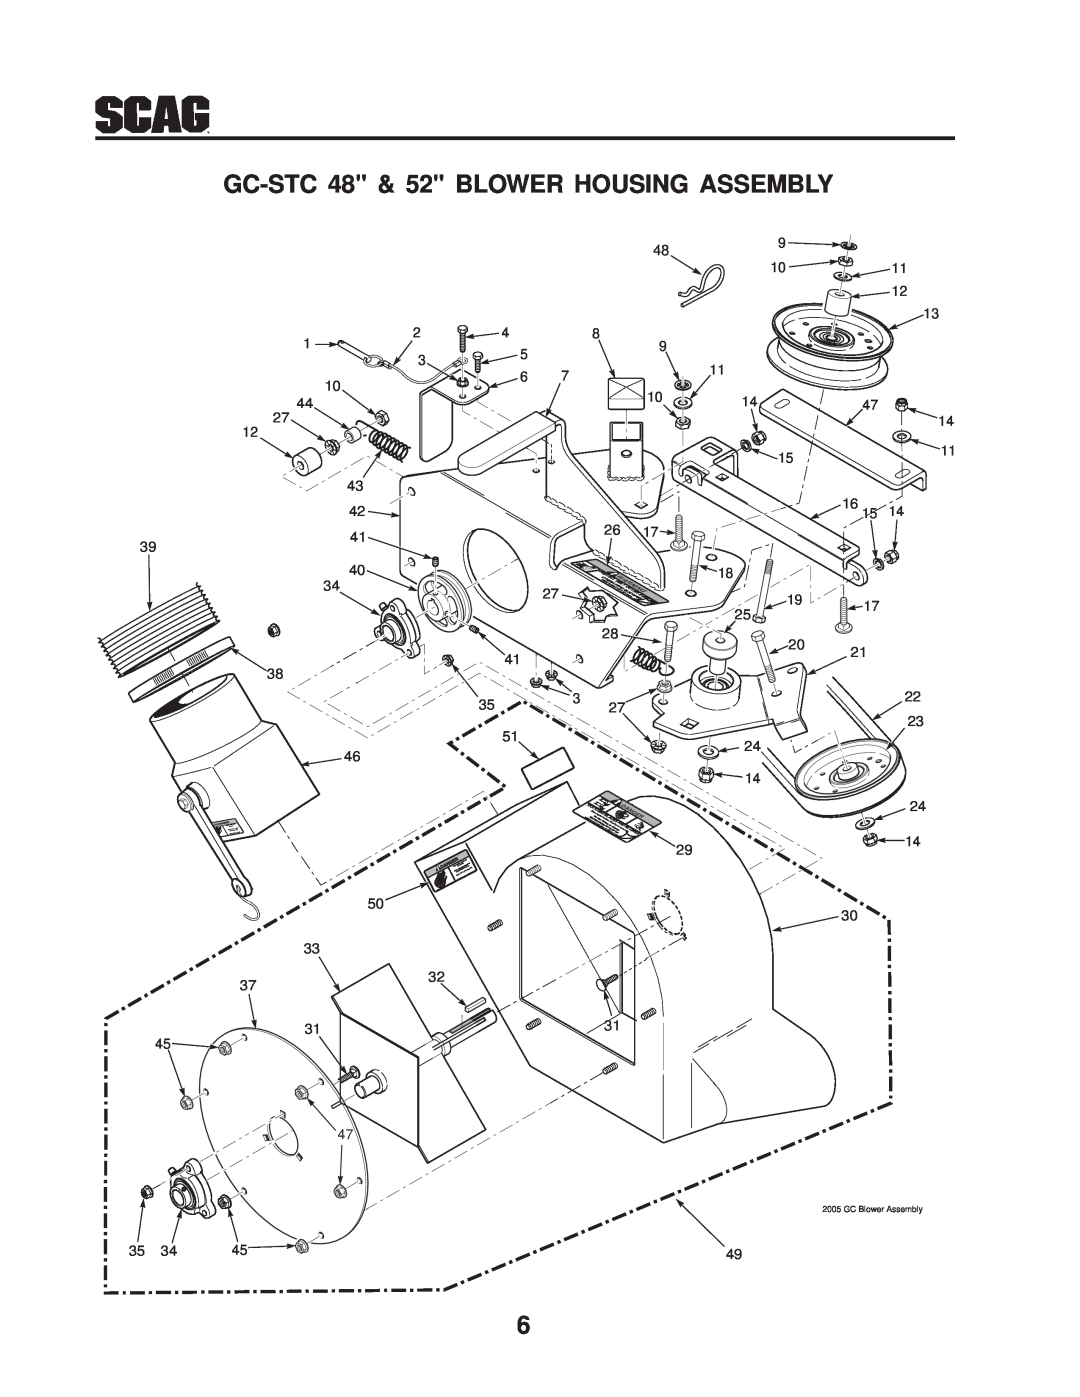 Scag Power Equipment manual GC-STC 48 & 52 BLOWER HOUSING ASSEMBLY, GC Blower Assembly, R Ange D, c S A 